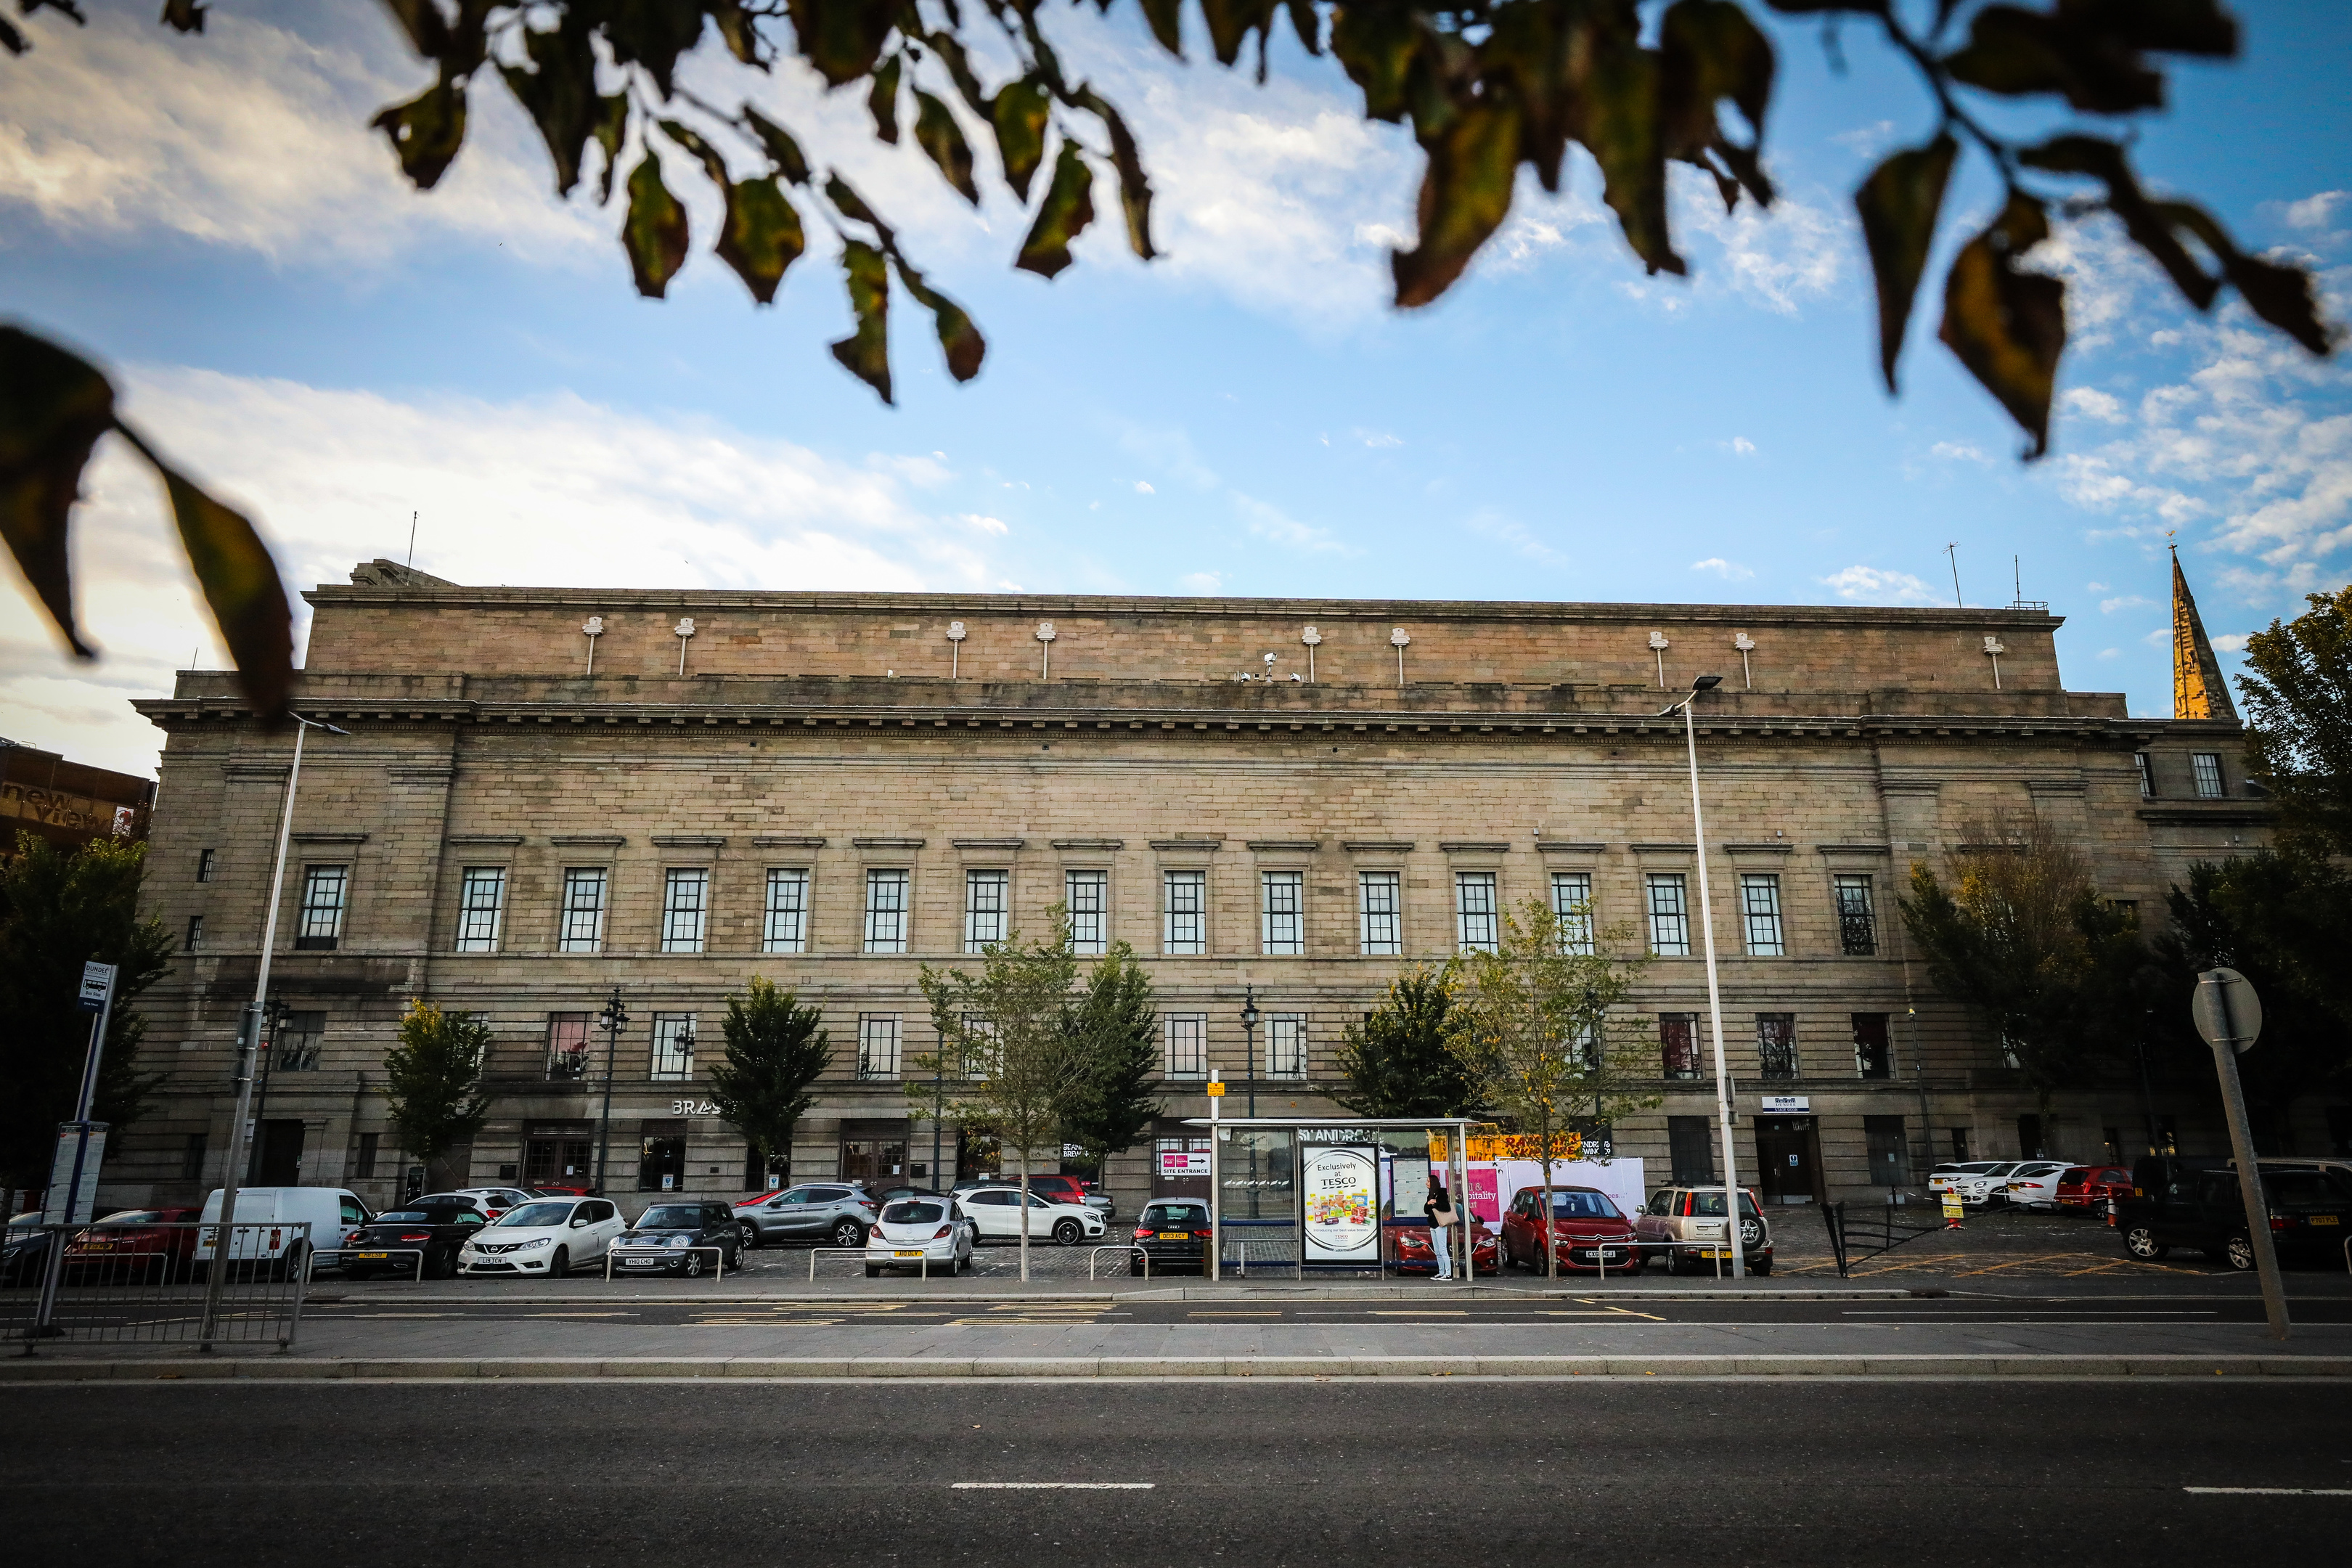 The south side of the Caird Hall.